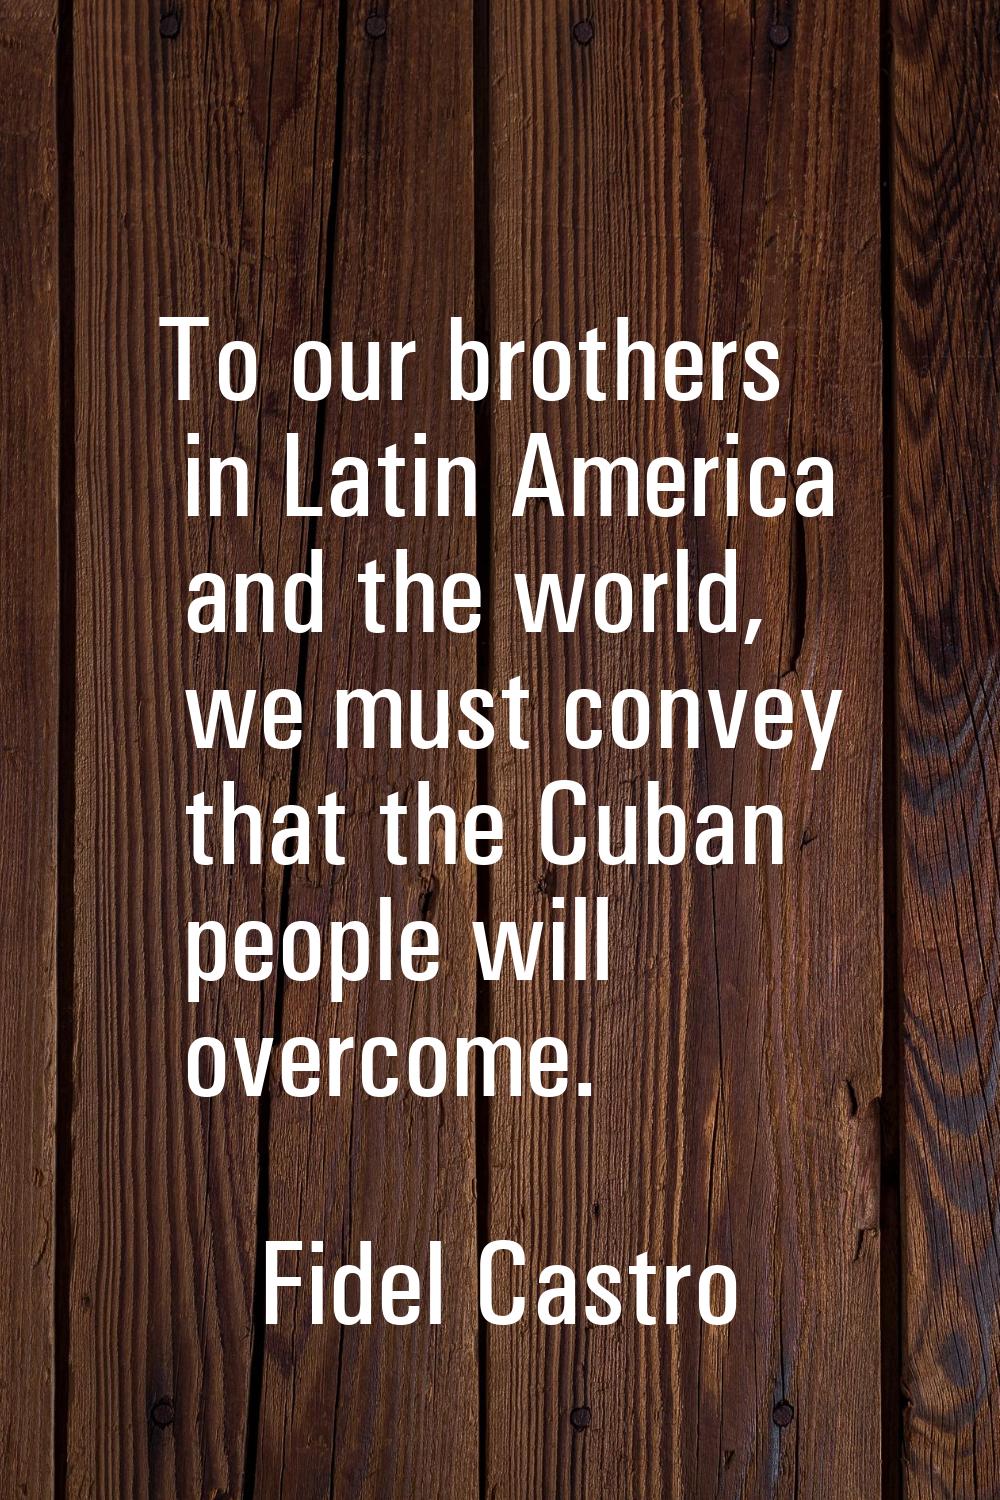 To our brothers in Latin America and the world, we must convey that the Cuban people will overcome.